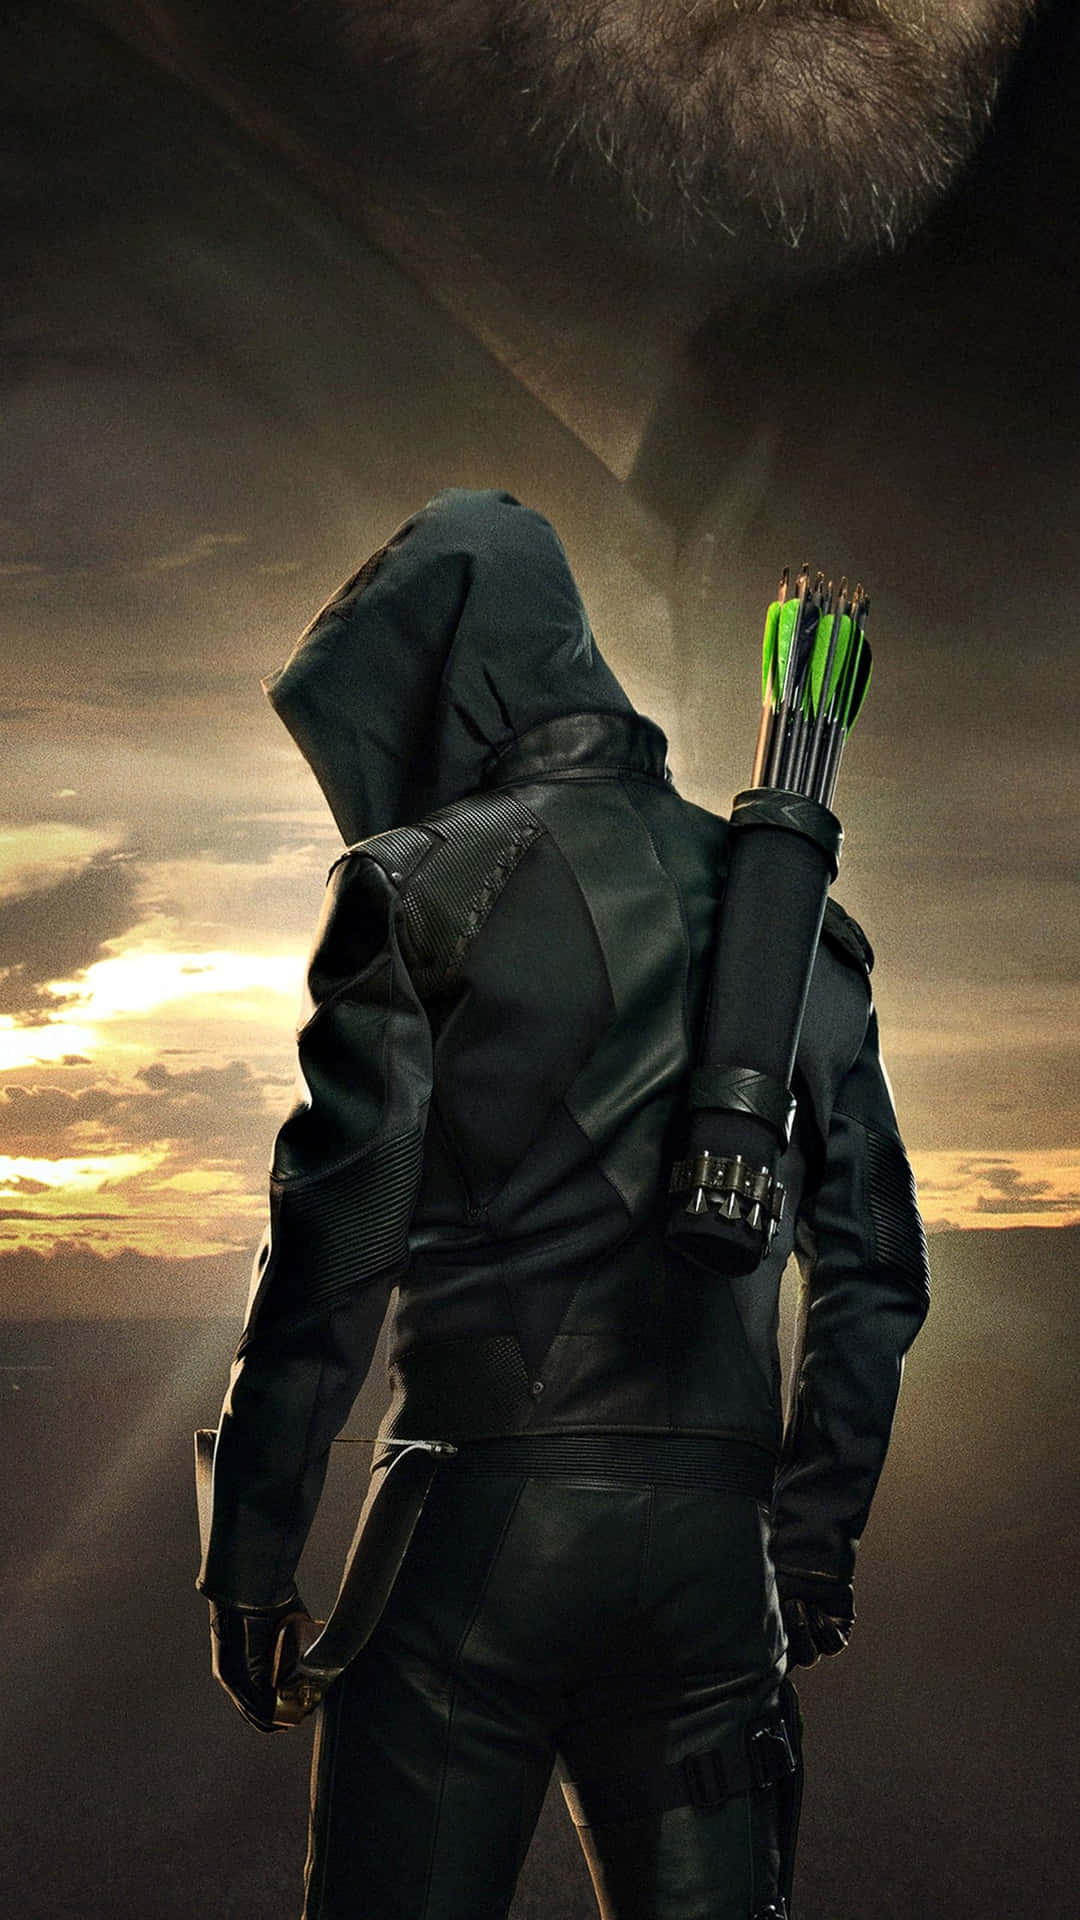 Get Your Green Arrow Iphone And Be Ready To Protect Your Home Like The Hero! Wallpaper